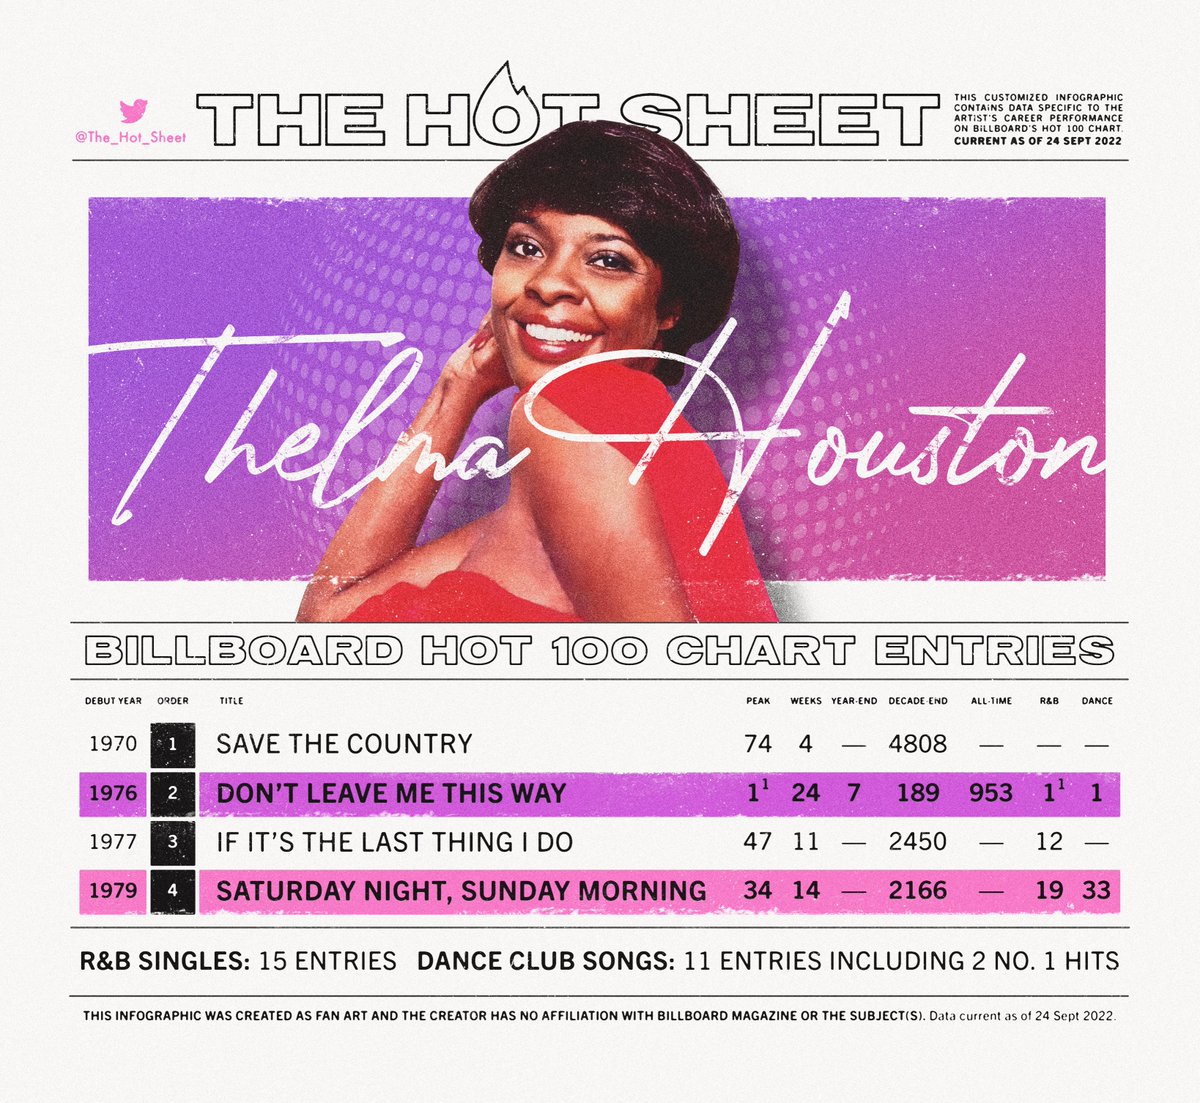 The Hot Sheet : THELMA HOUSTON (@Thelma_Houston) : Billboard Hot 100 Chart History : Press/hold image to view in 4K high-resolution on mobile : #thelmahouston